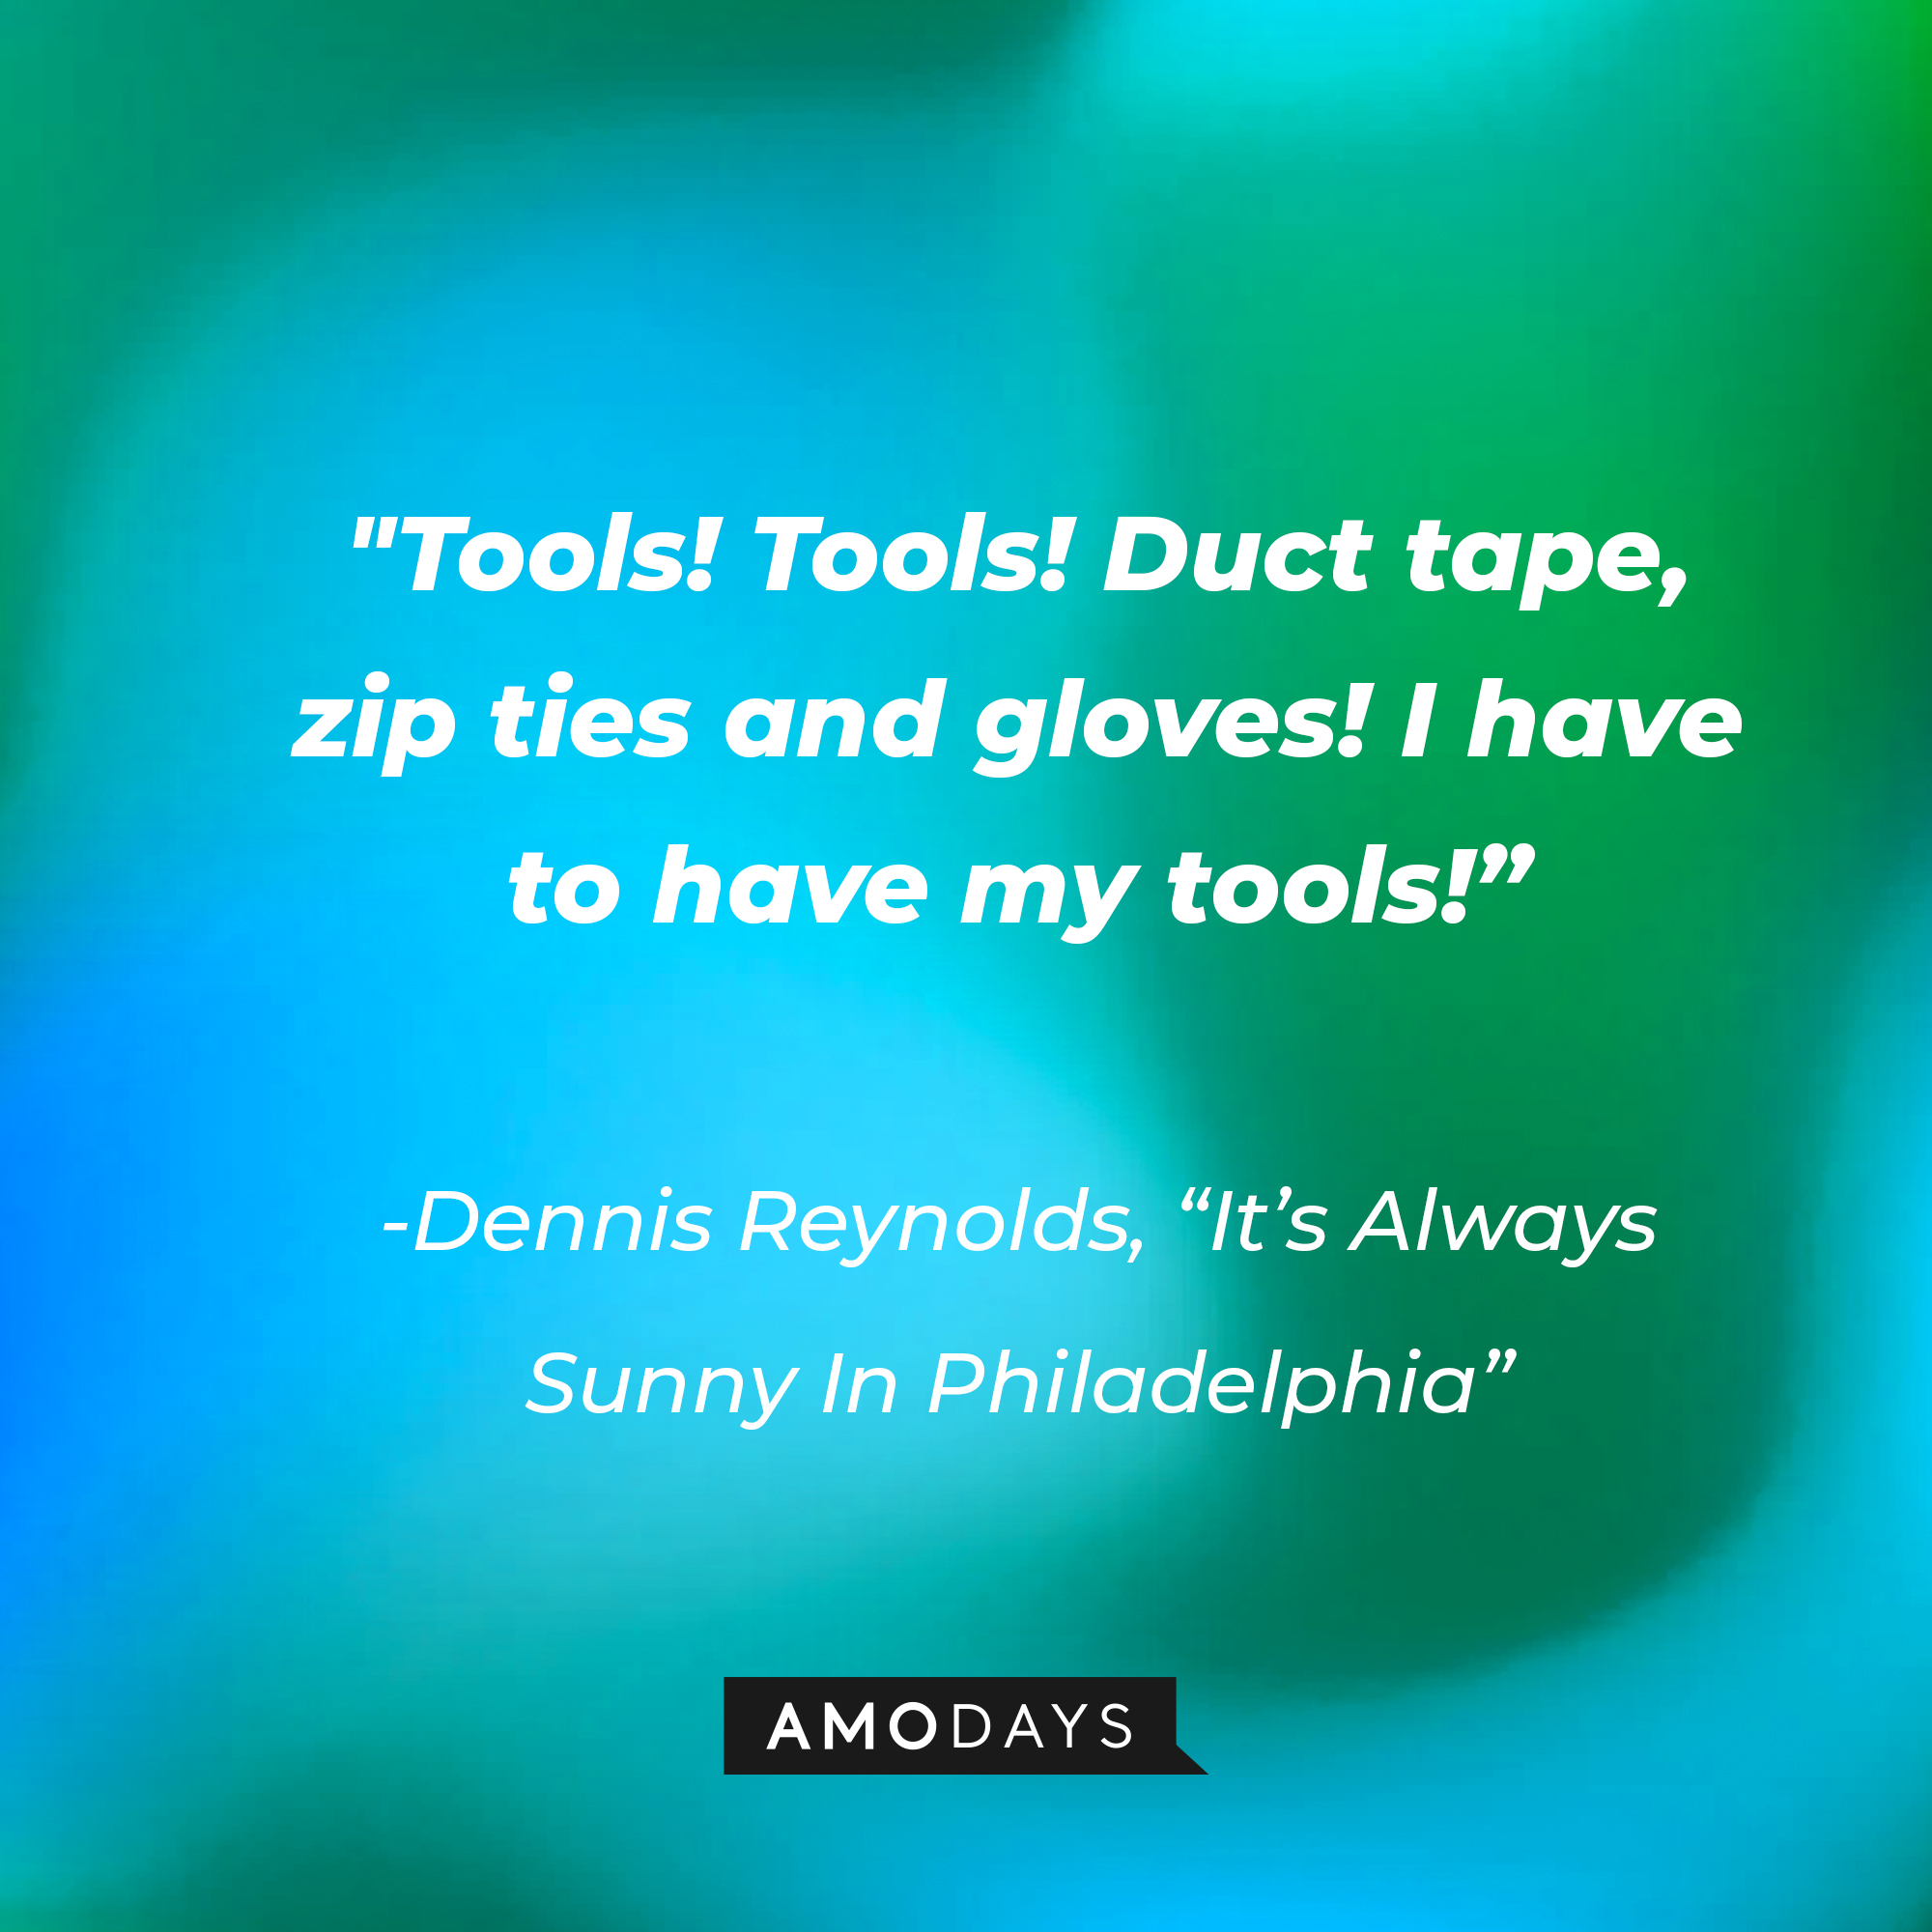 Dennis Reynolds’ quote from "It’s Always Sunny In Philadelphia": “Tools! Tools! Duct tape, zip ties and gloves! I have to have my tools!” | Source: AmoDays